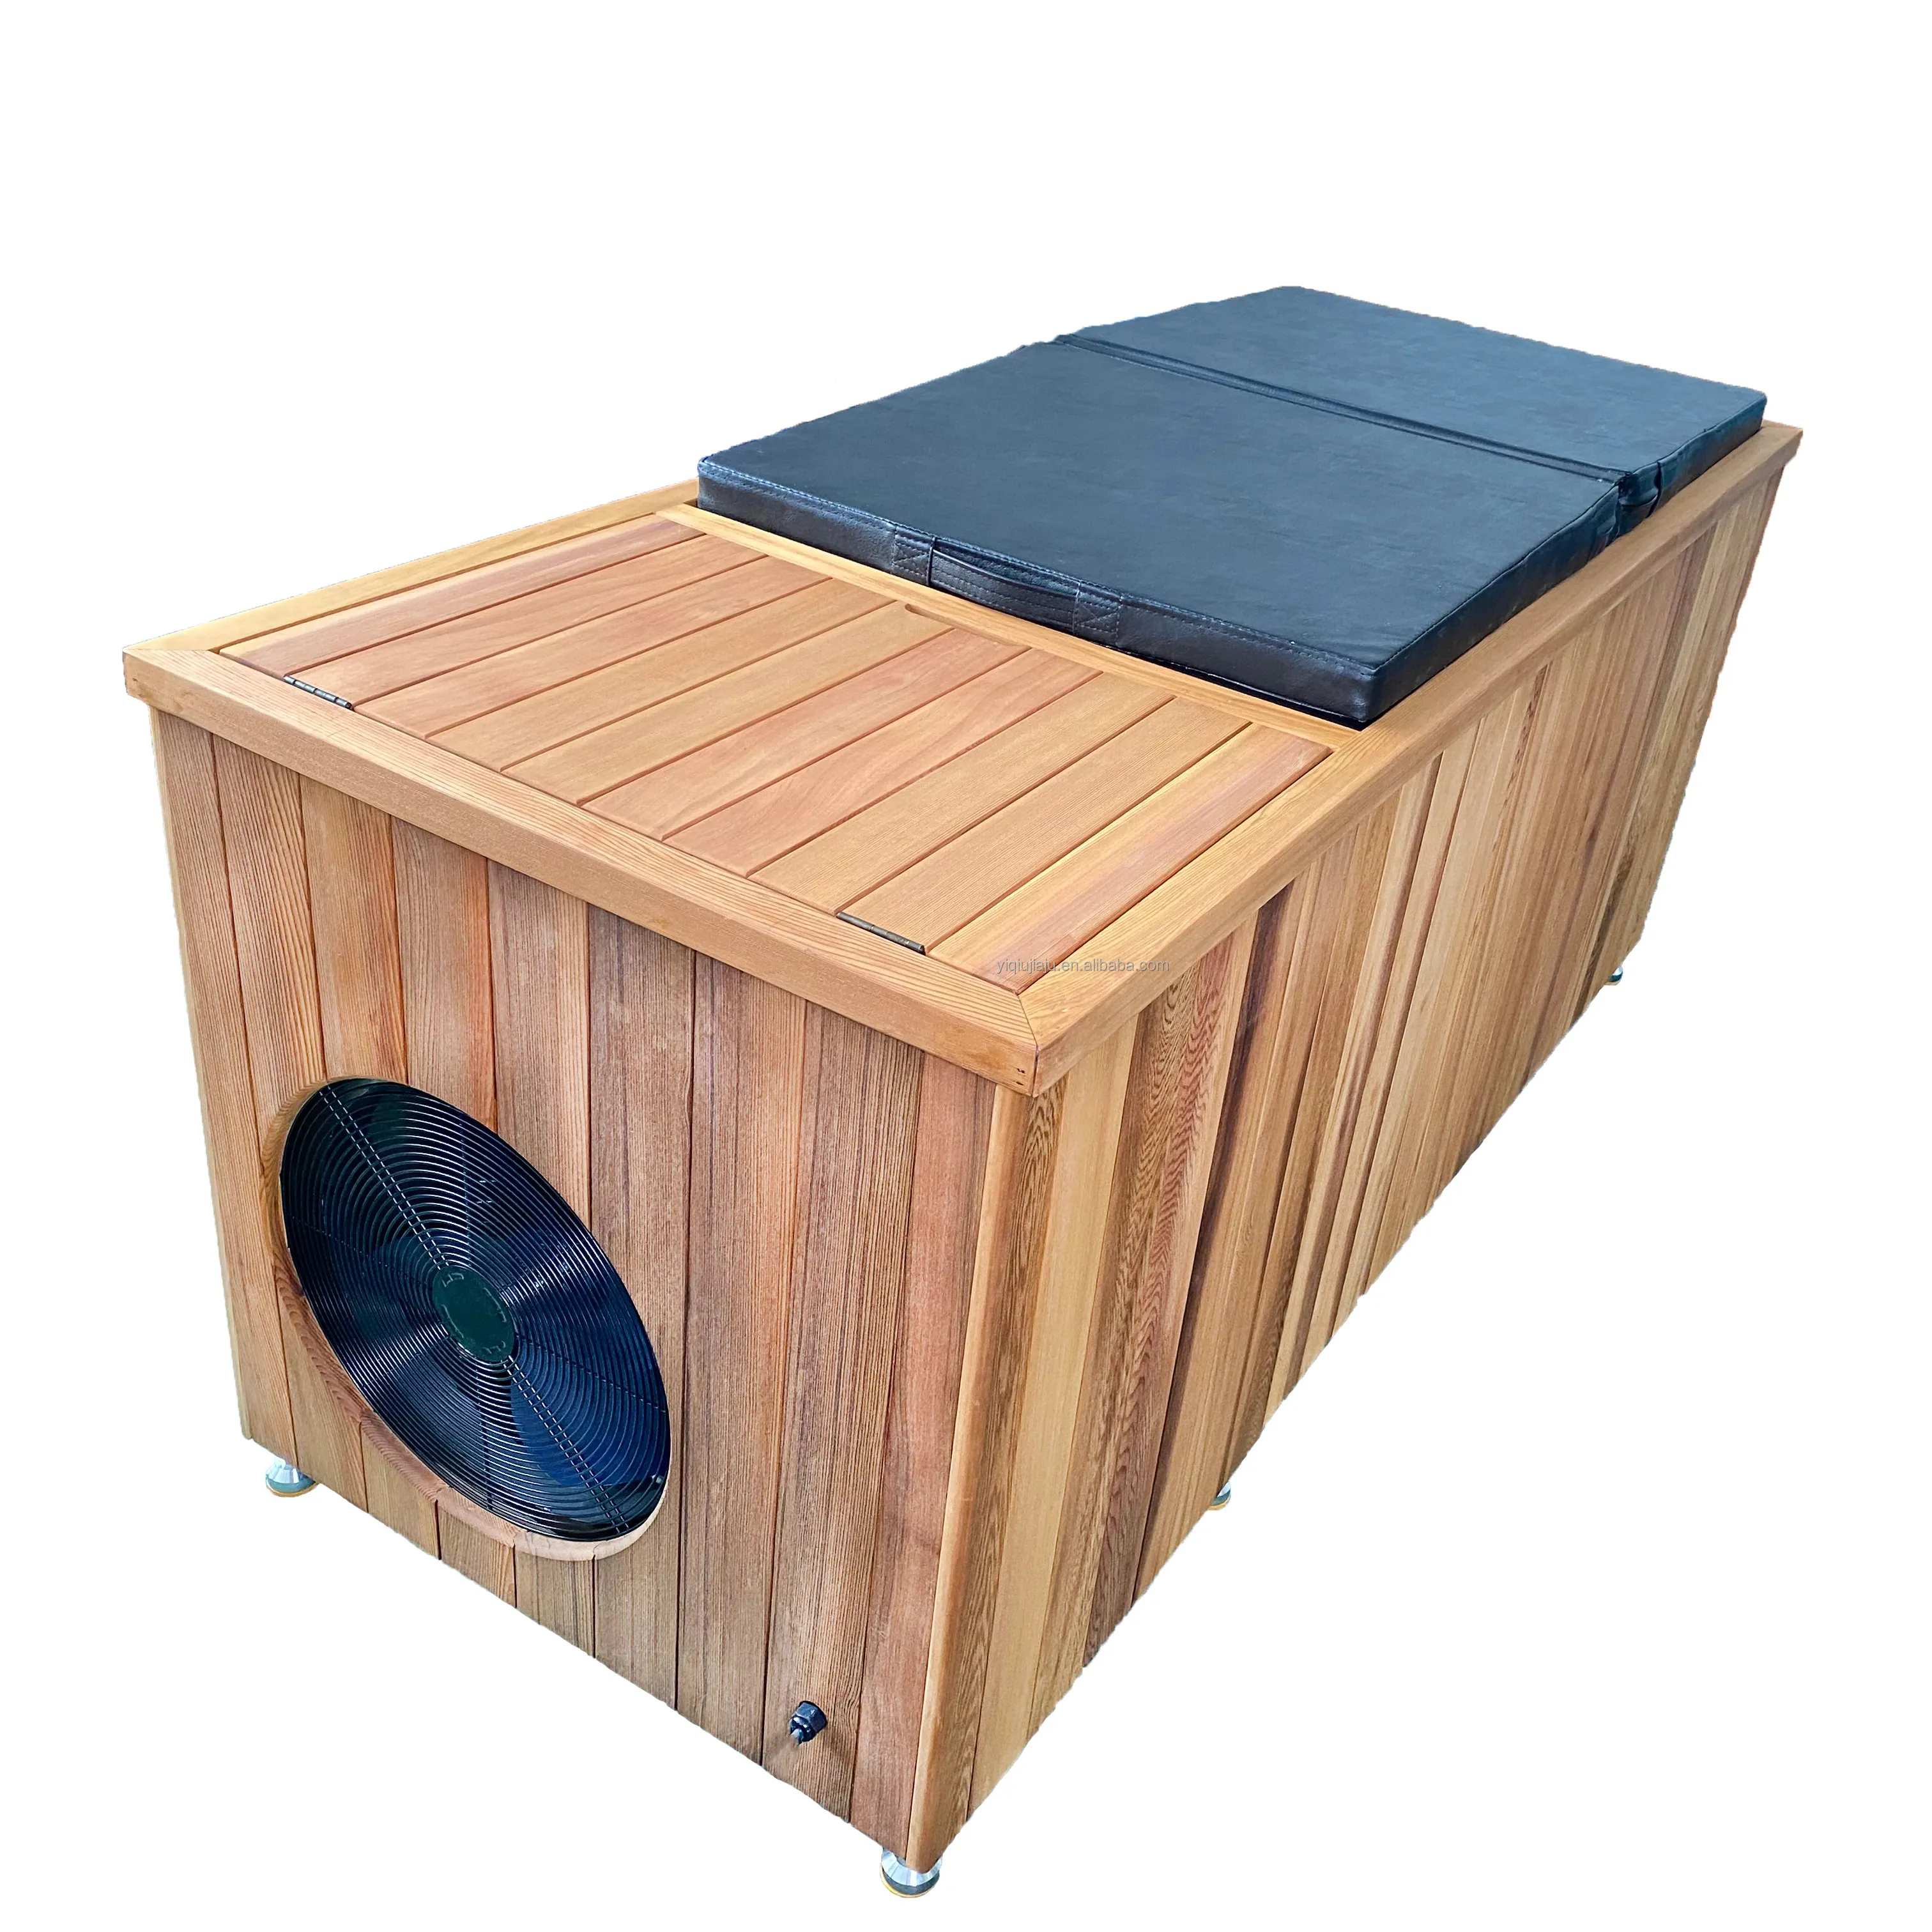 Cedar Lover New Design 2 Person Wooden Small Ice Bath Ice Pool For Fitness Recovery Cold Plunge Chiller Optional